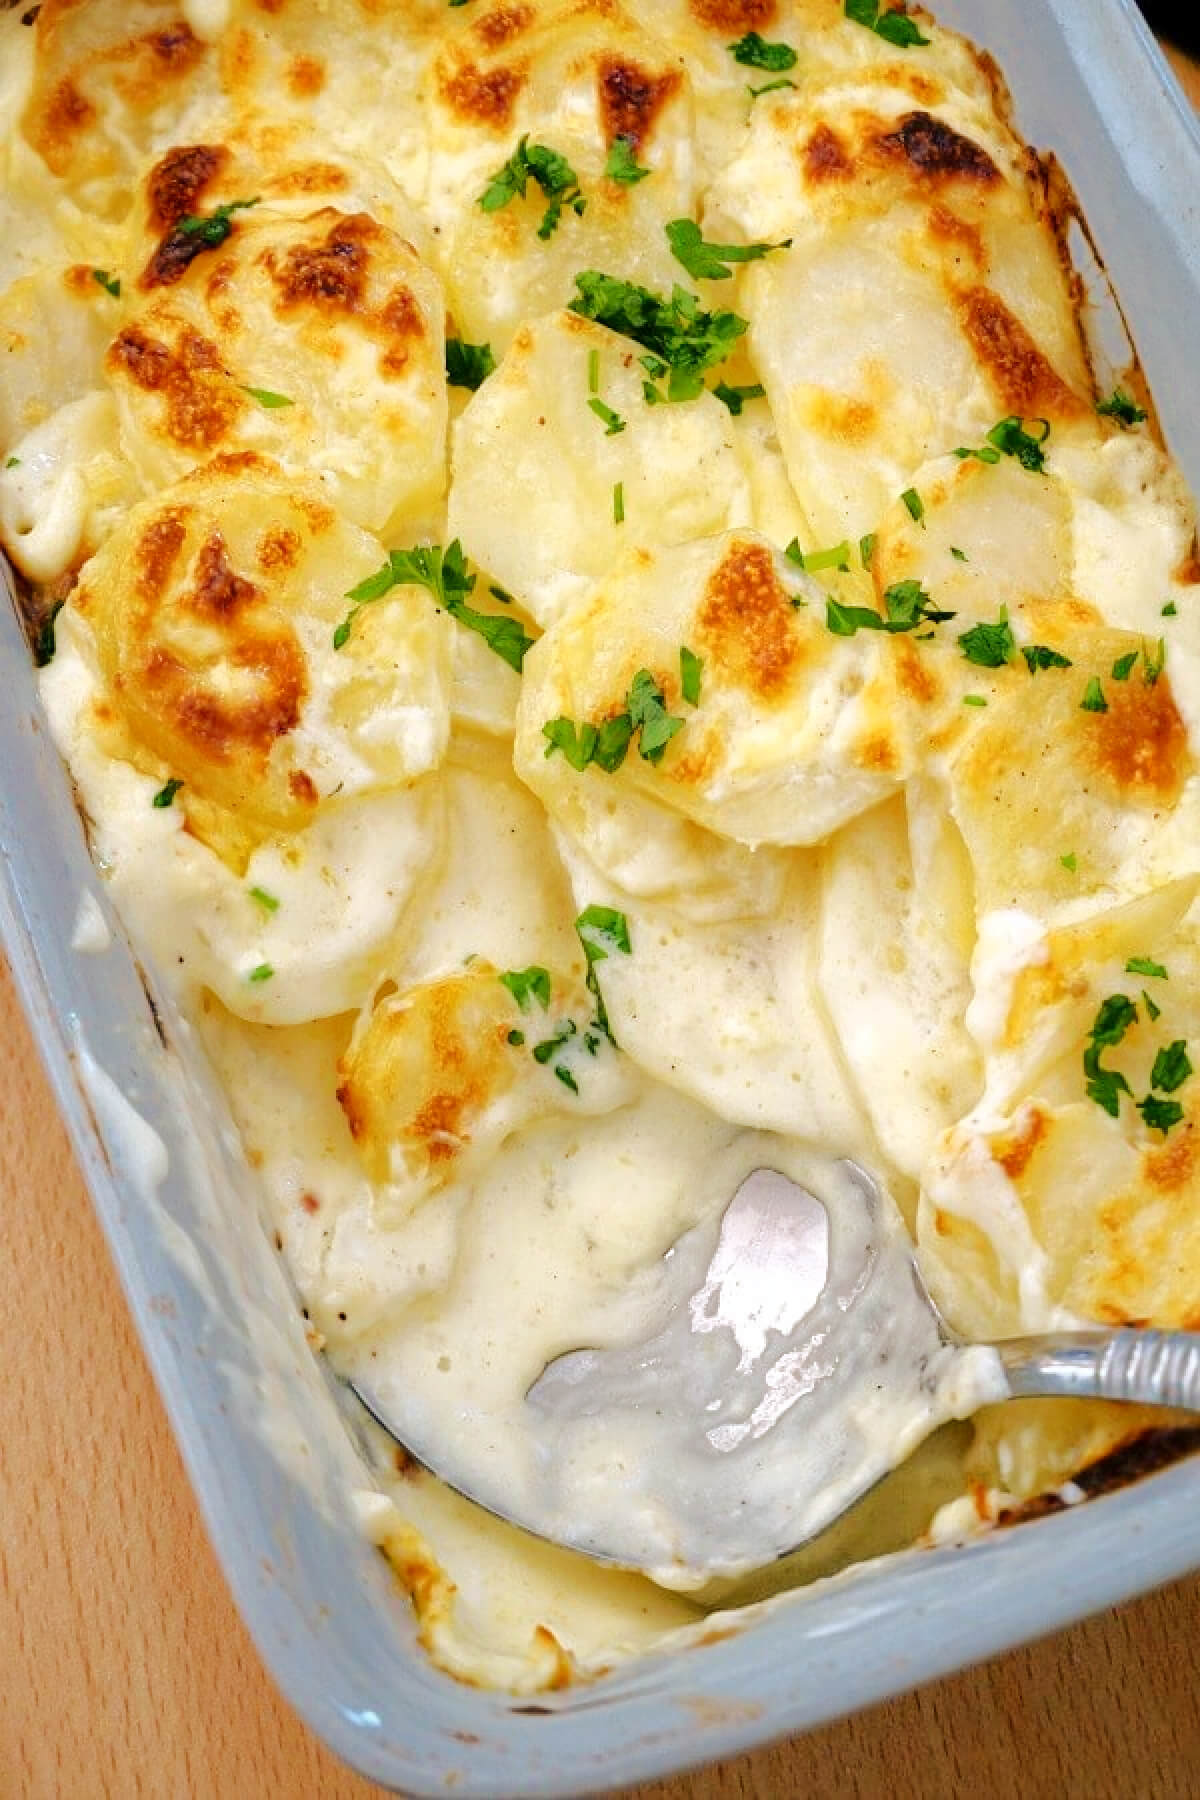 A dish with potato gratin and a spoon.